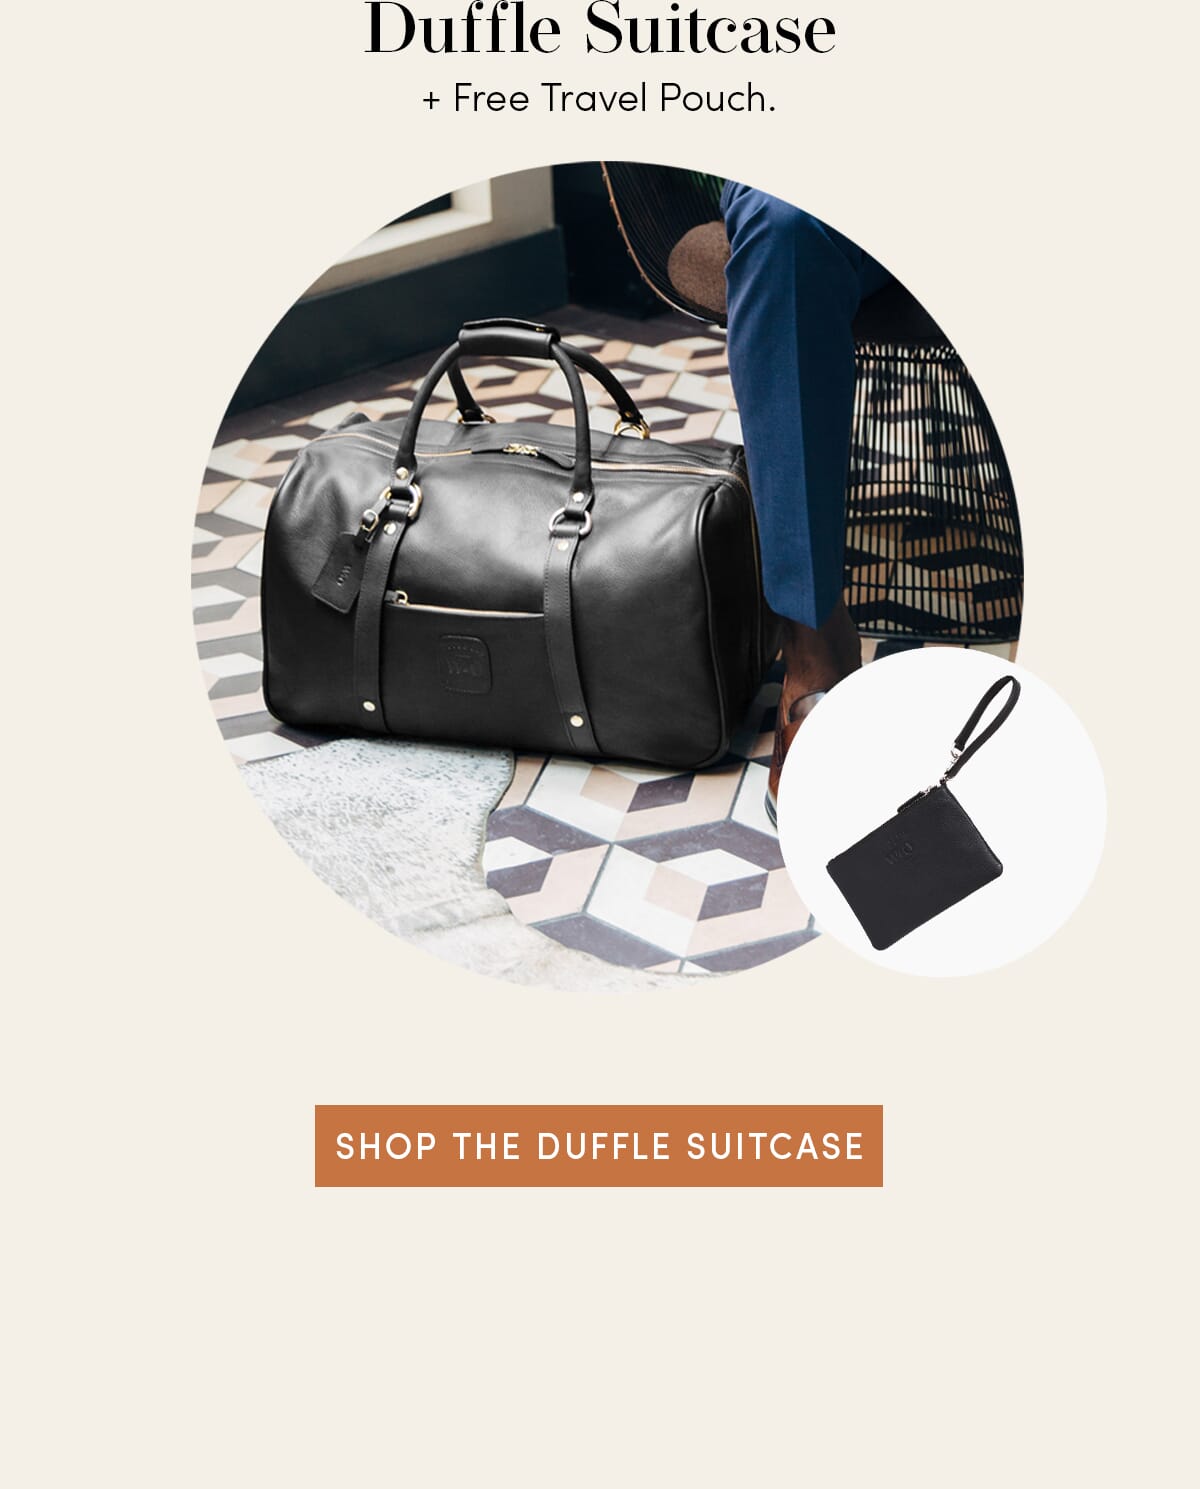 Get a free gift + a chance to win $200 with any purchase of a Jet Black Bag